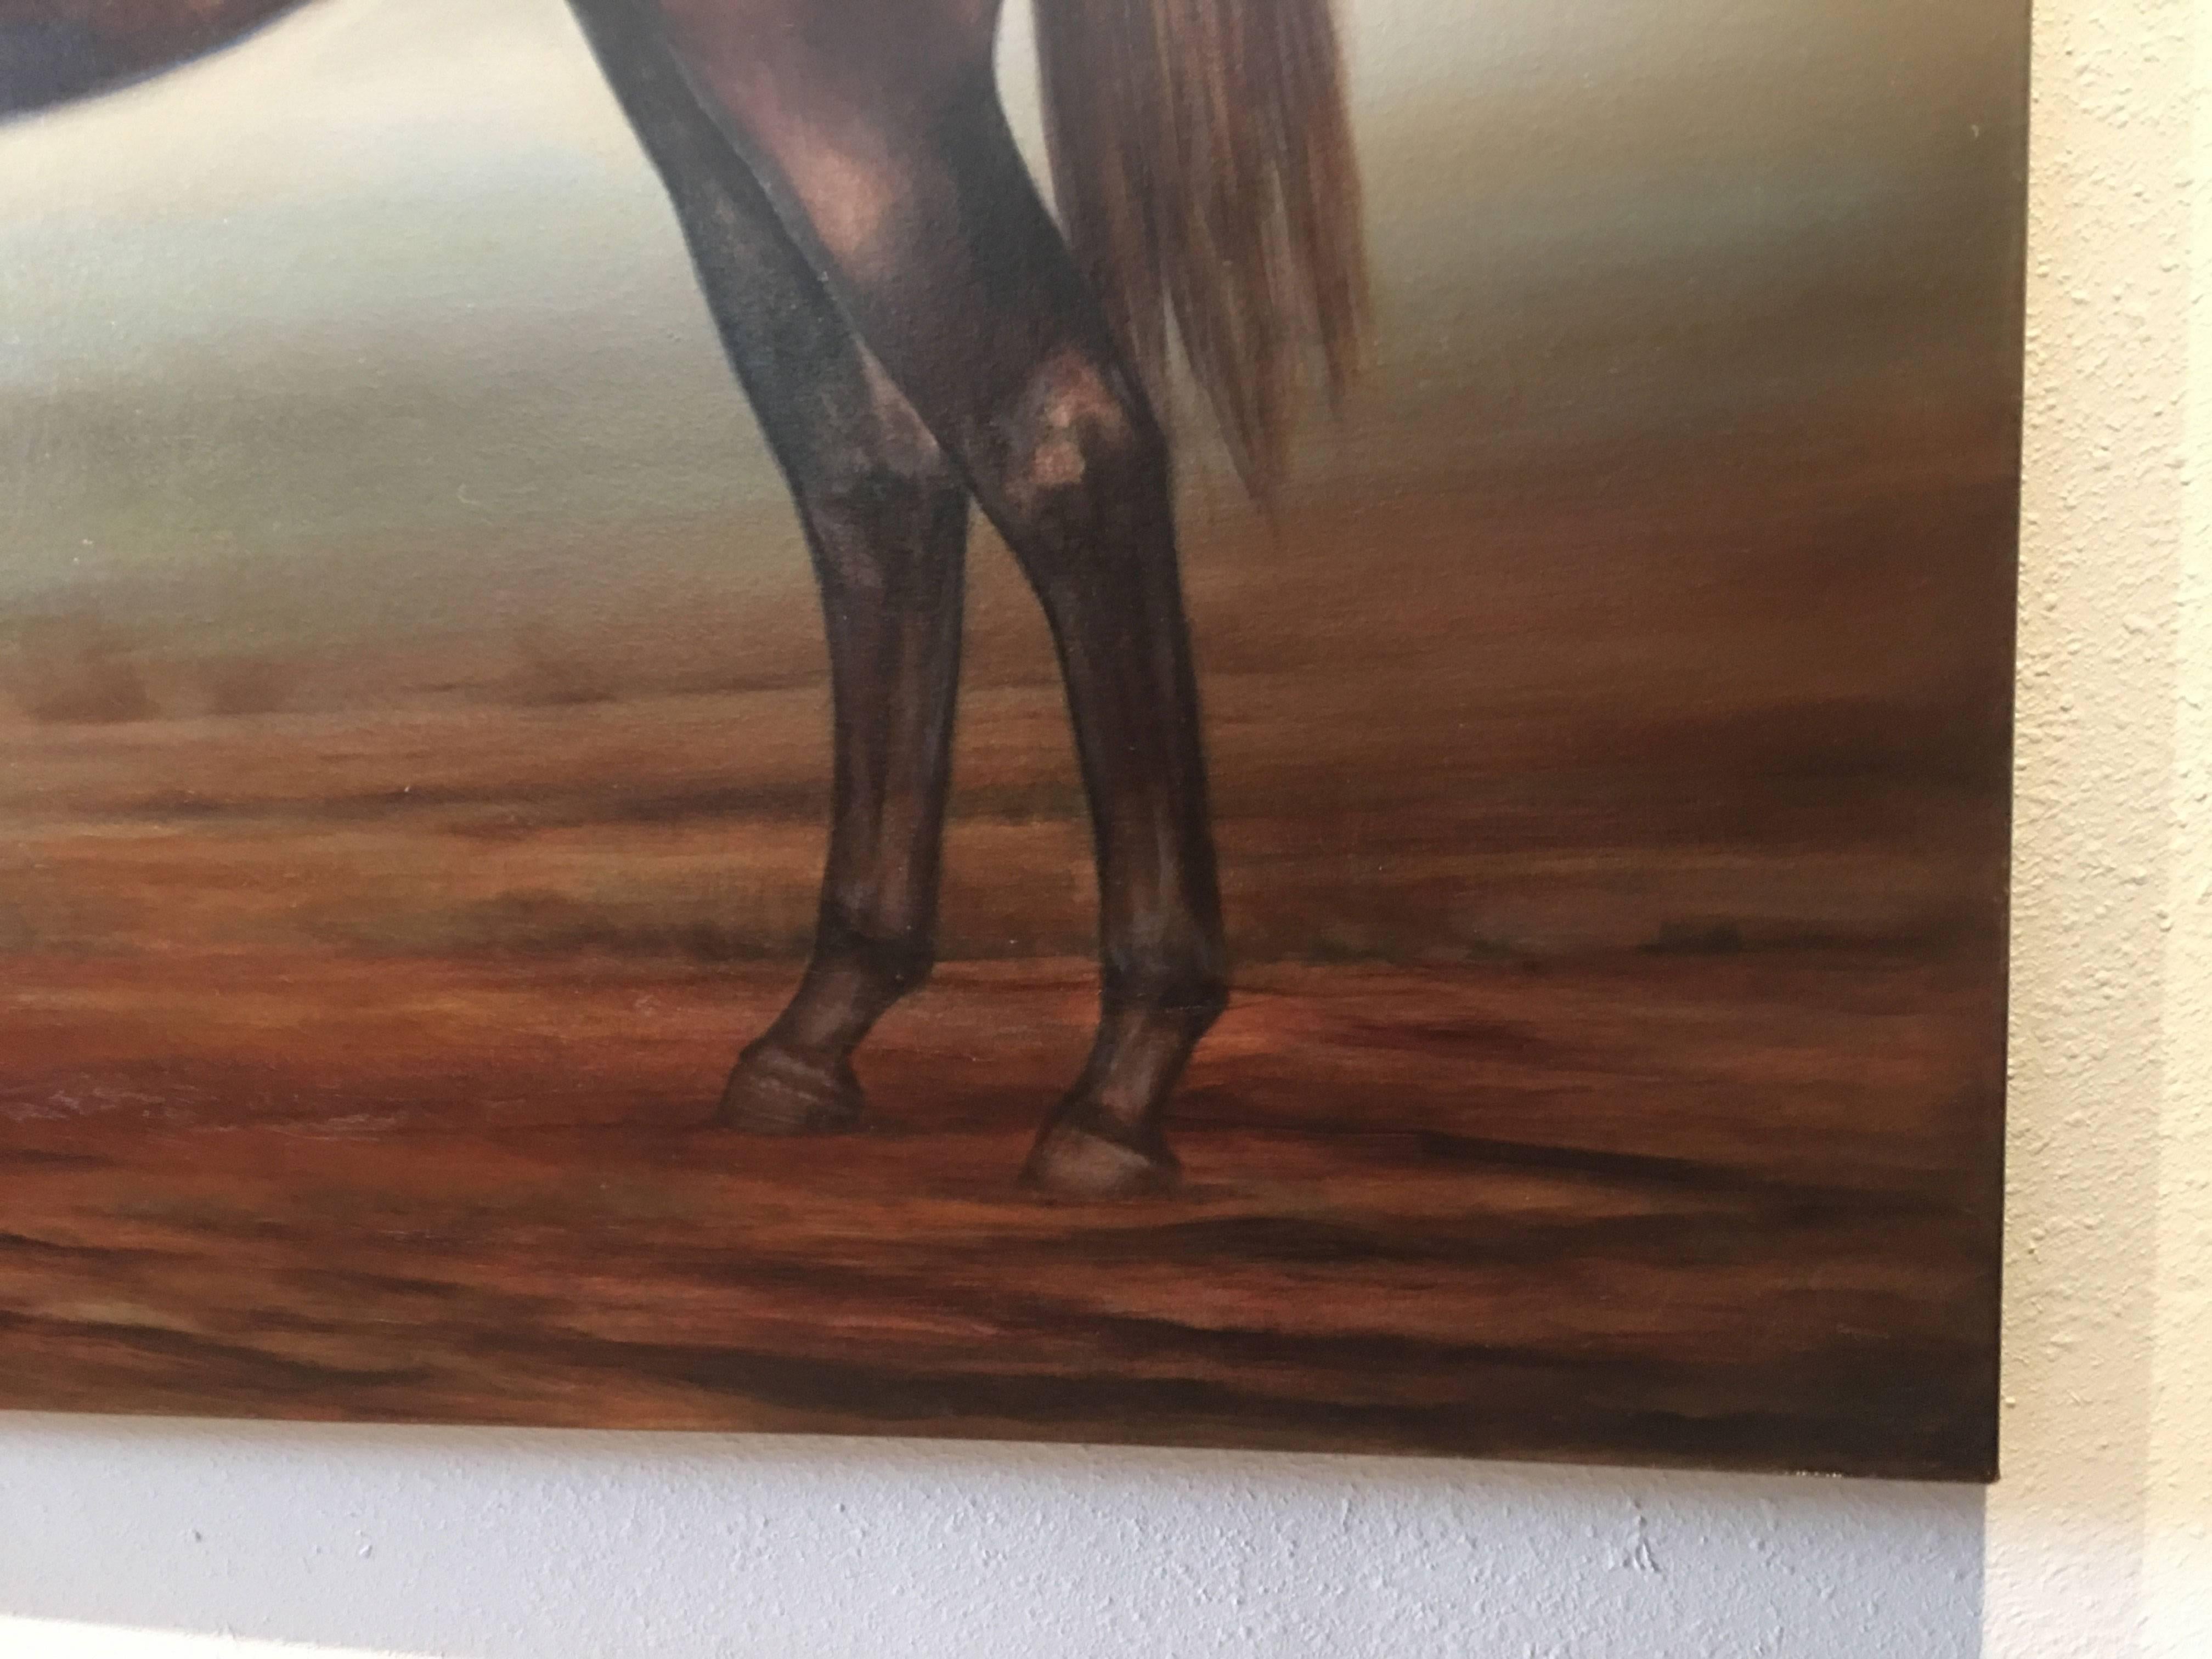 Horse in Morning Light - Realist Painting by Kurt Meer